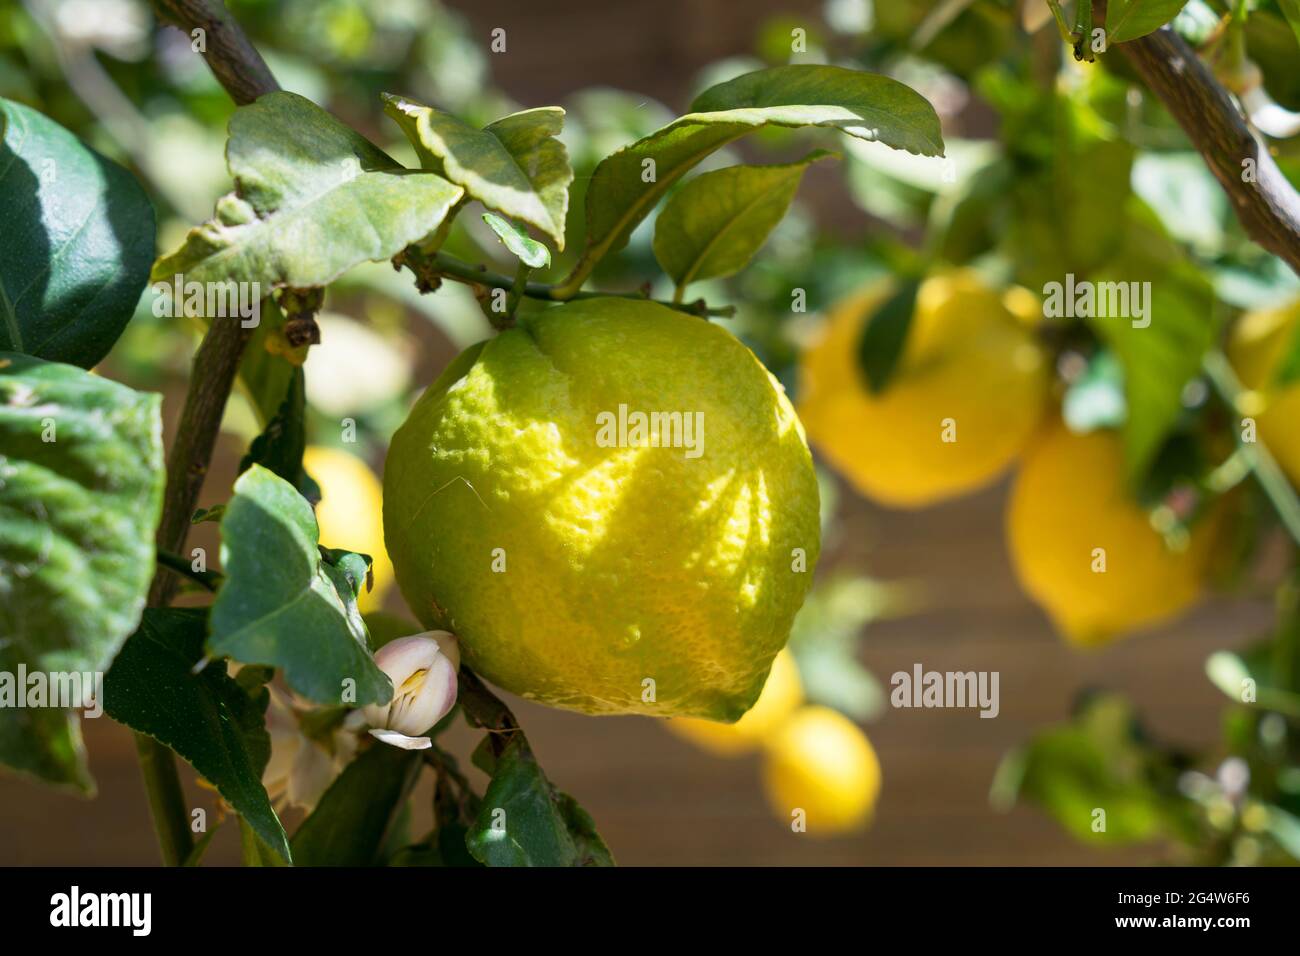 natural yellow lemon and white flower bud in spring Stock Photo